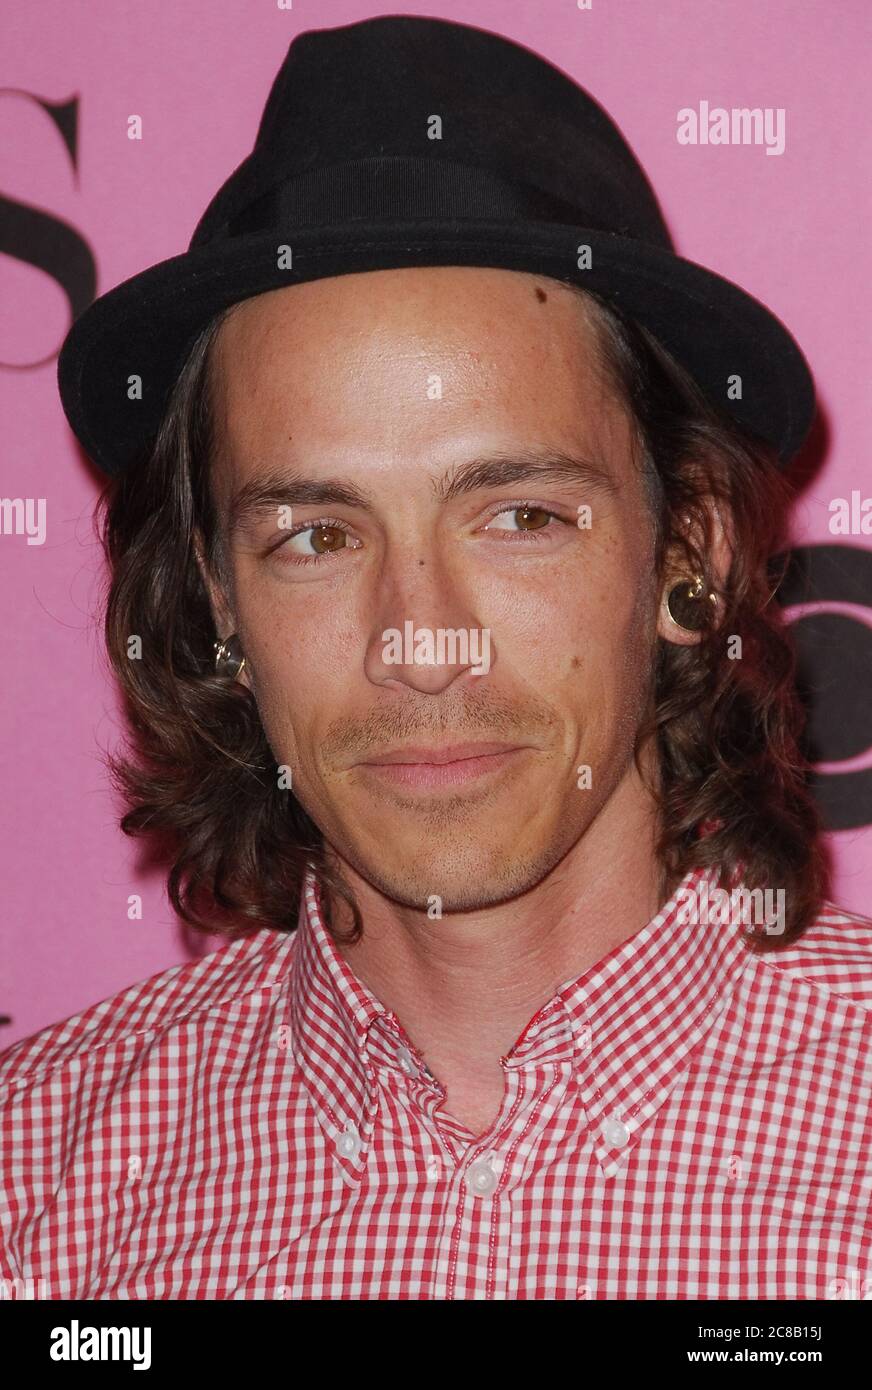 Brandon Boyd at the 2007 Victoria's Secret Fashion Show held at the Kodak Theatre in Hollywood, CA. The event took place on Thursday, November 15, 2007. Photo by: SBM / PictureLux - File Reference # 34006-9962SBMPLX Stock Photo